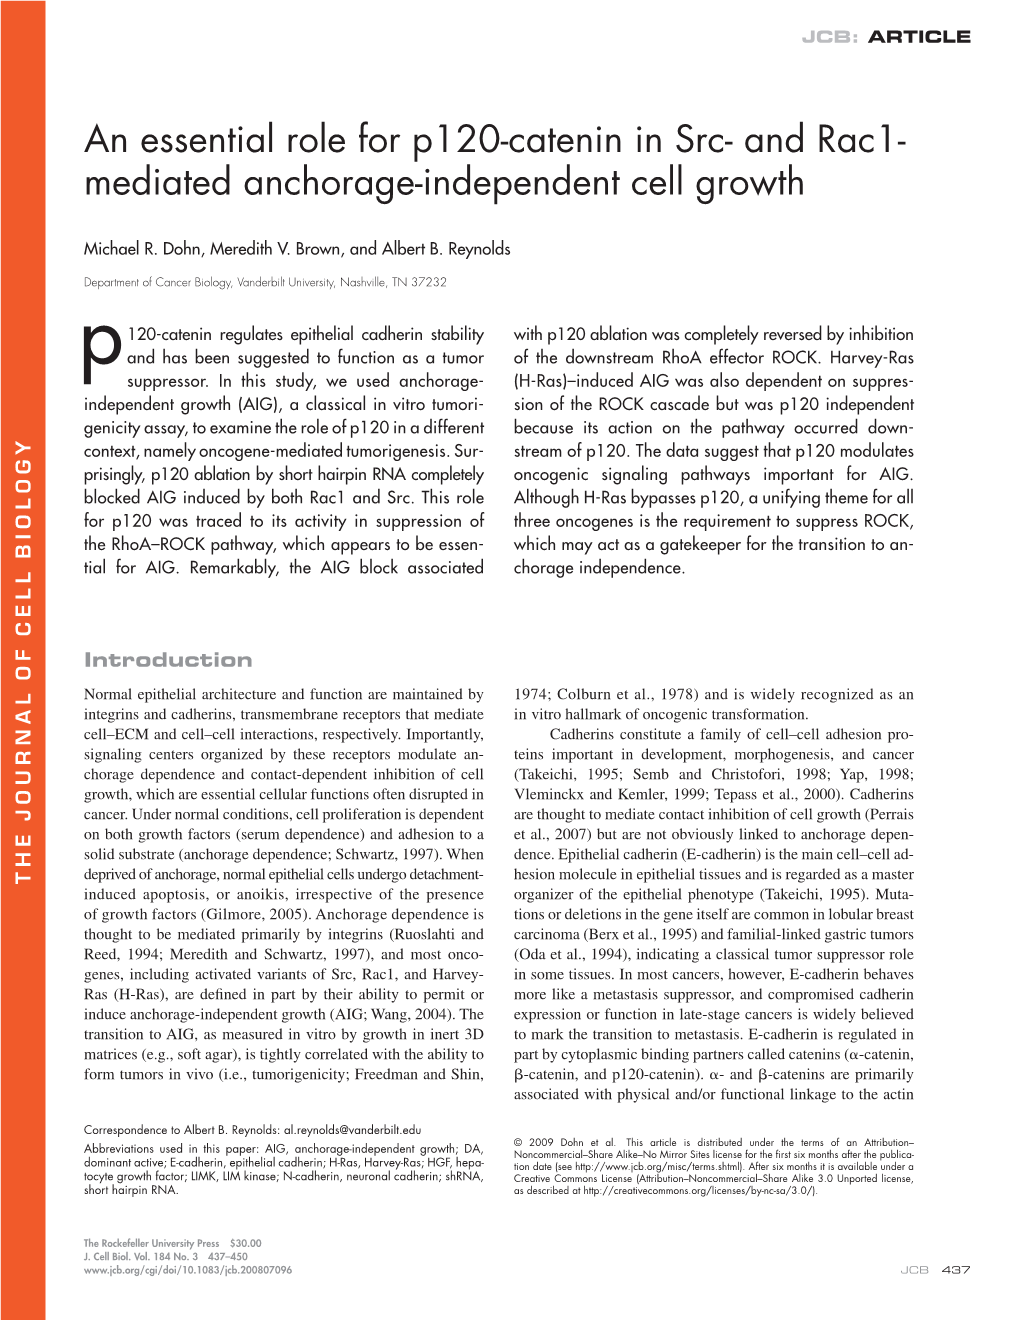 Mediated Anchorage-Independent Cell Growth